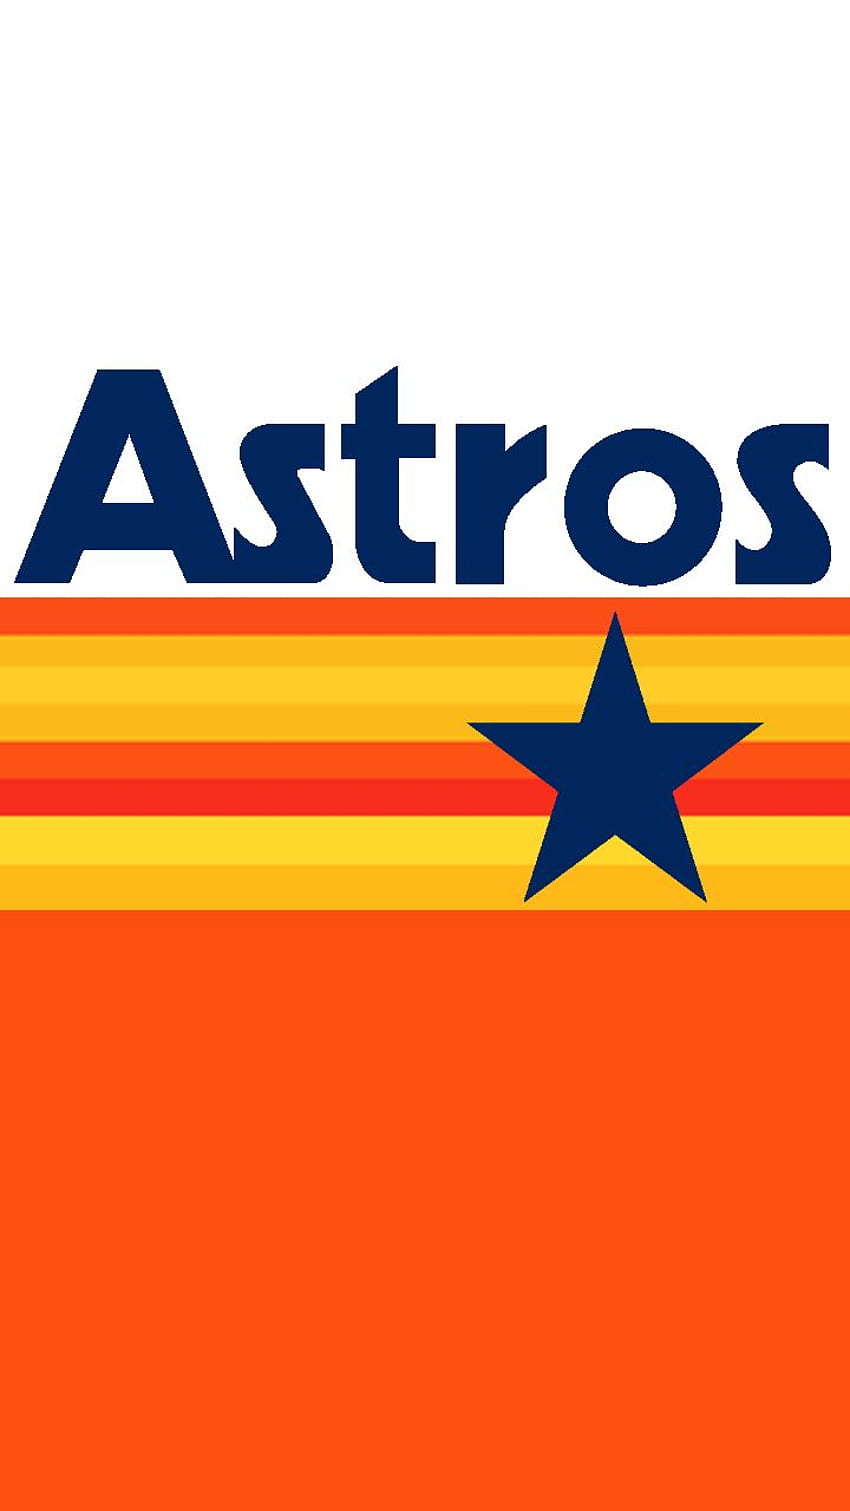 I made a throwback Astros mobile , let me know what you think! : Astros HD phone wallpaper